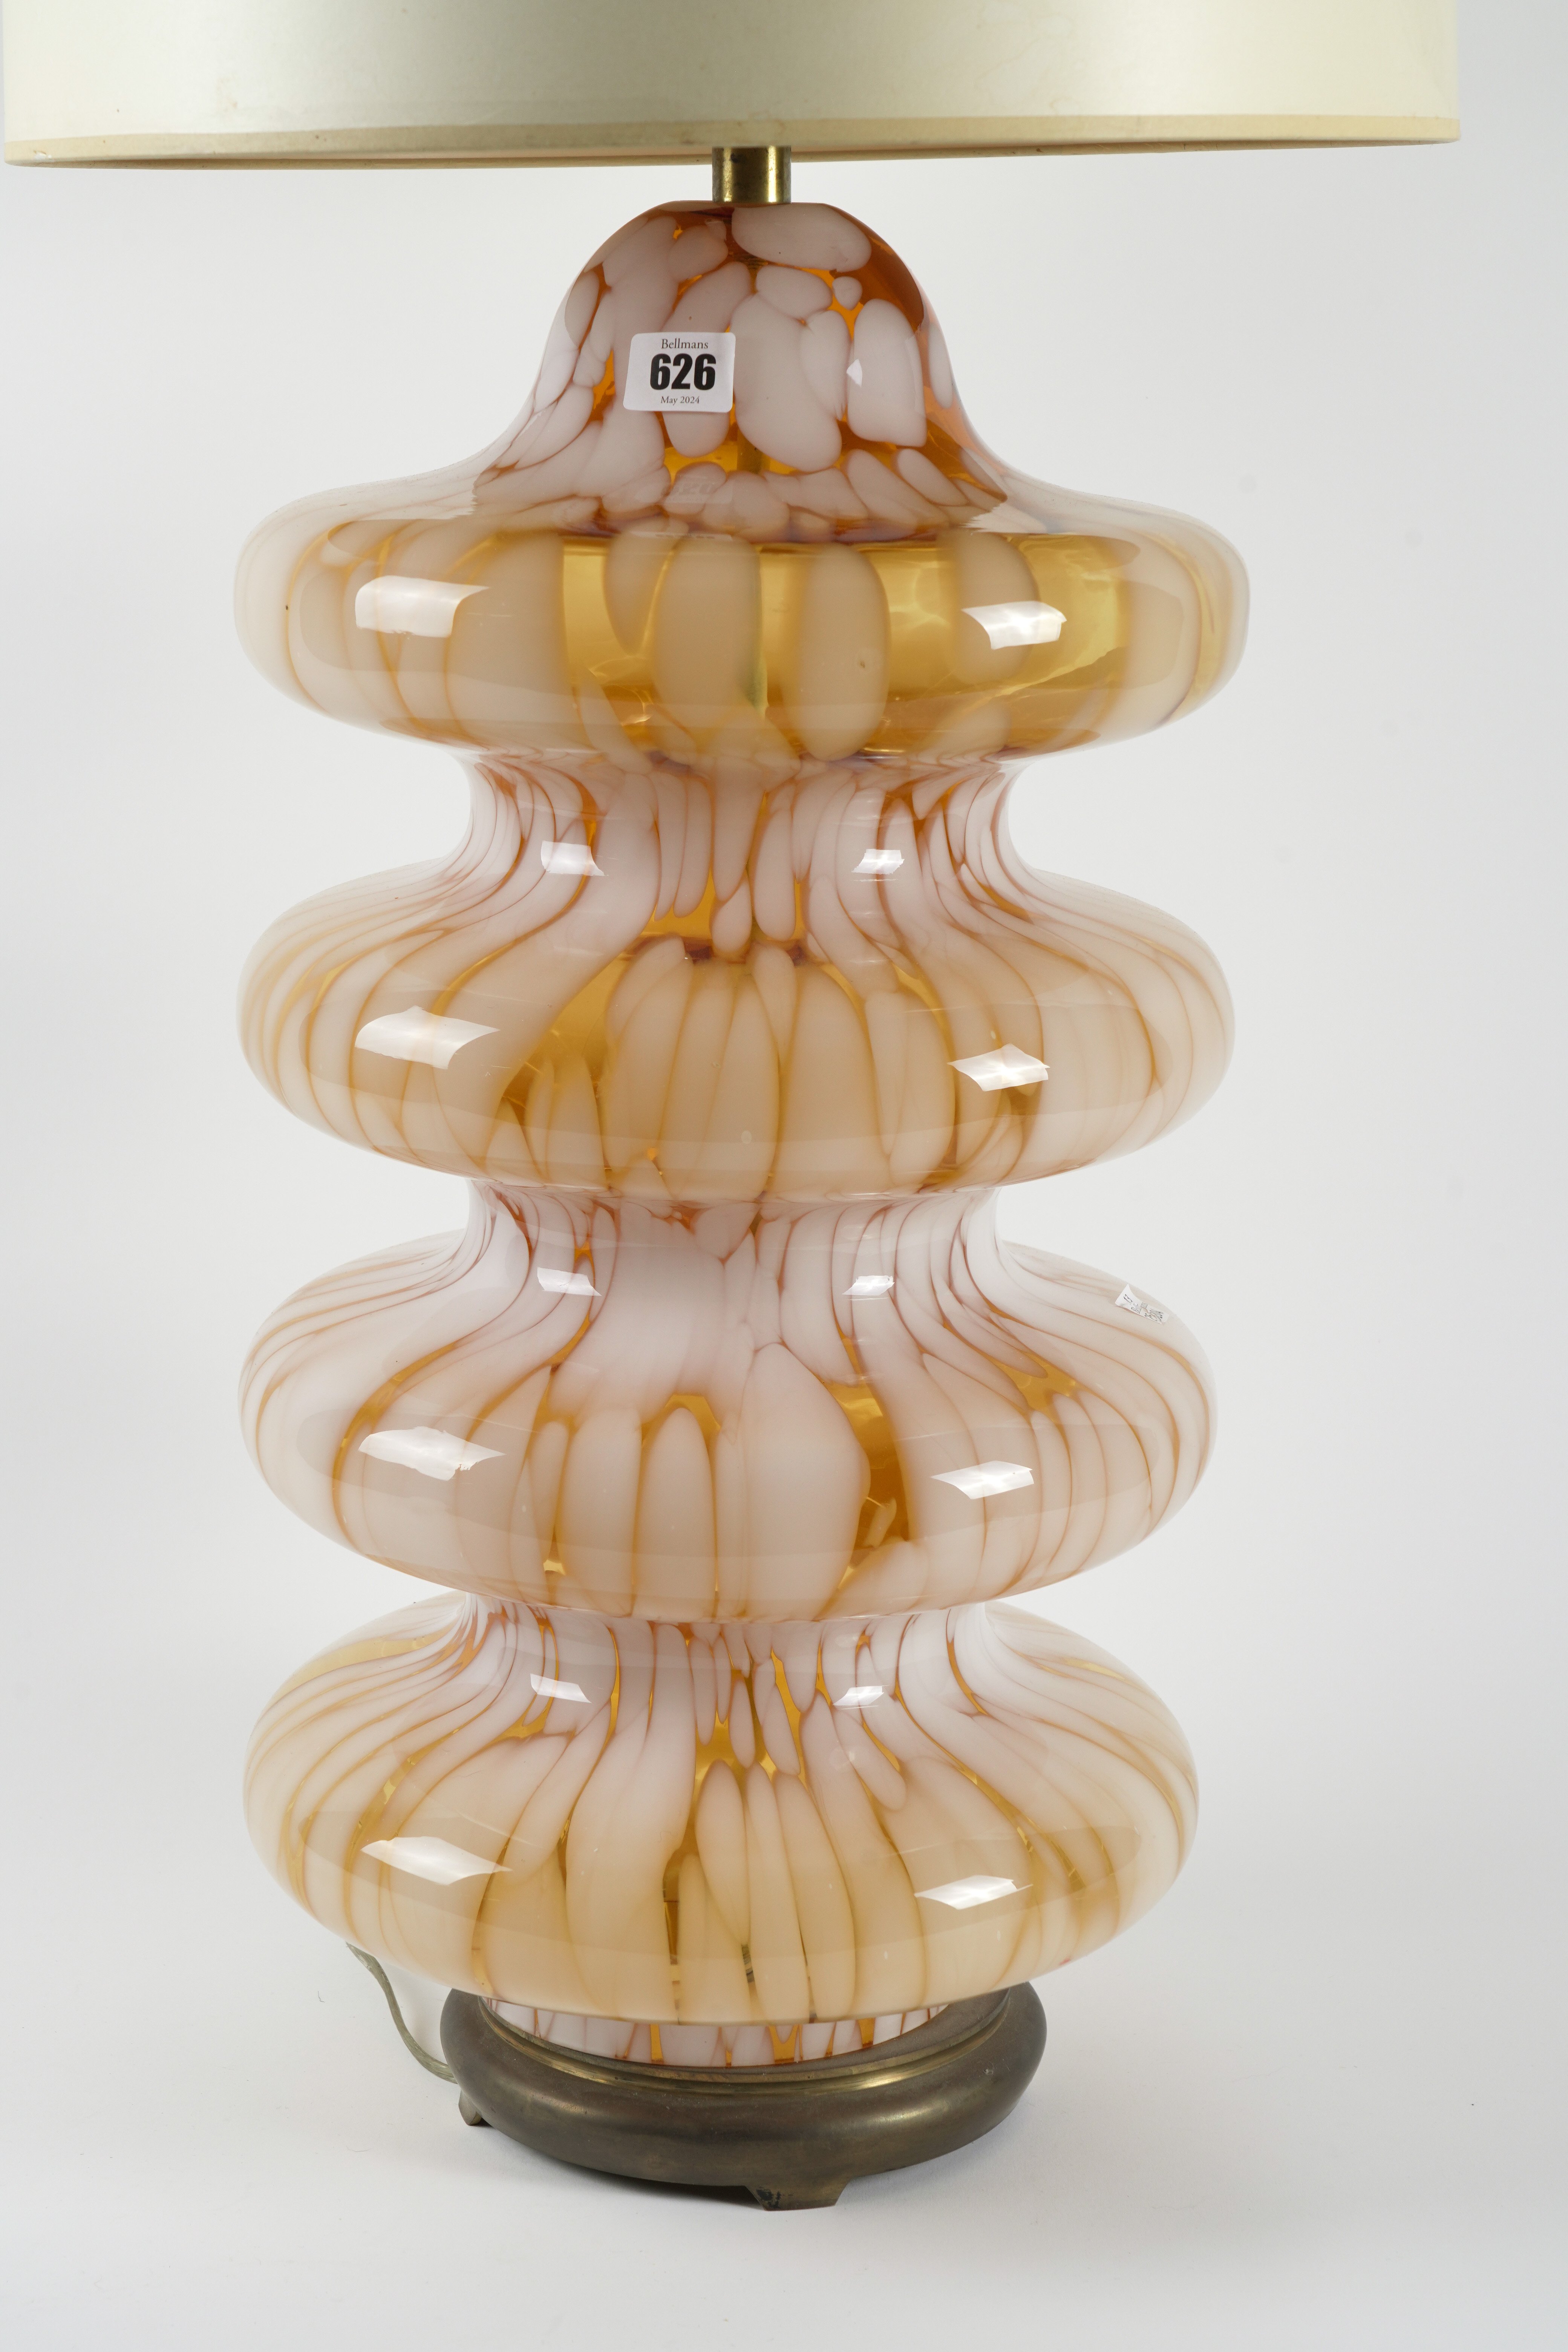 ATTRIBUTED TO CARLO NASON FOR MEZZEGA: A MURANO GLASS AMBER AND MILK GLASS TIERED TABLE LAMP - Image 2 of 2